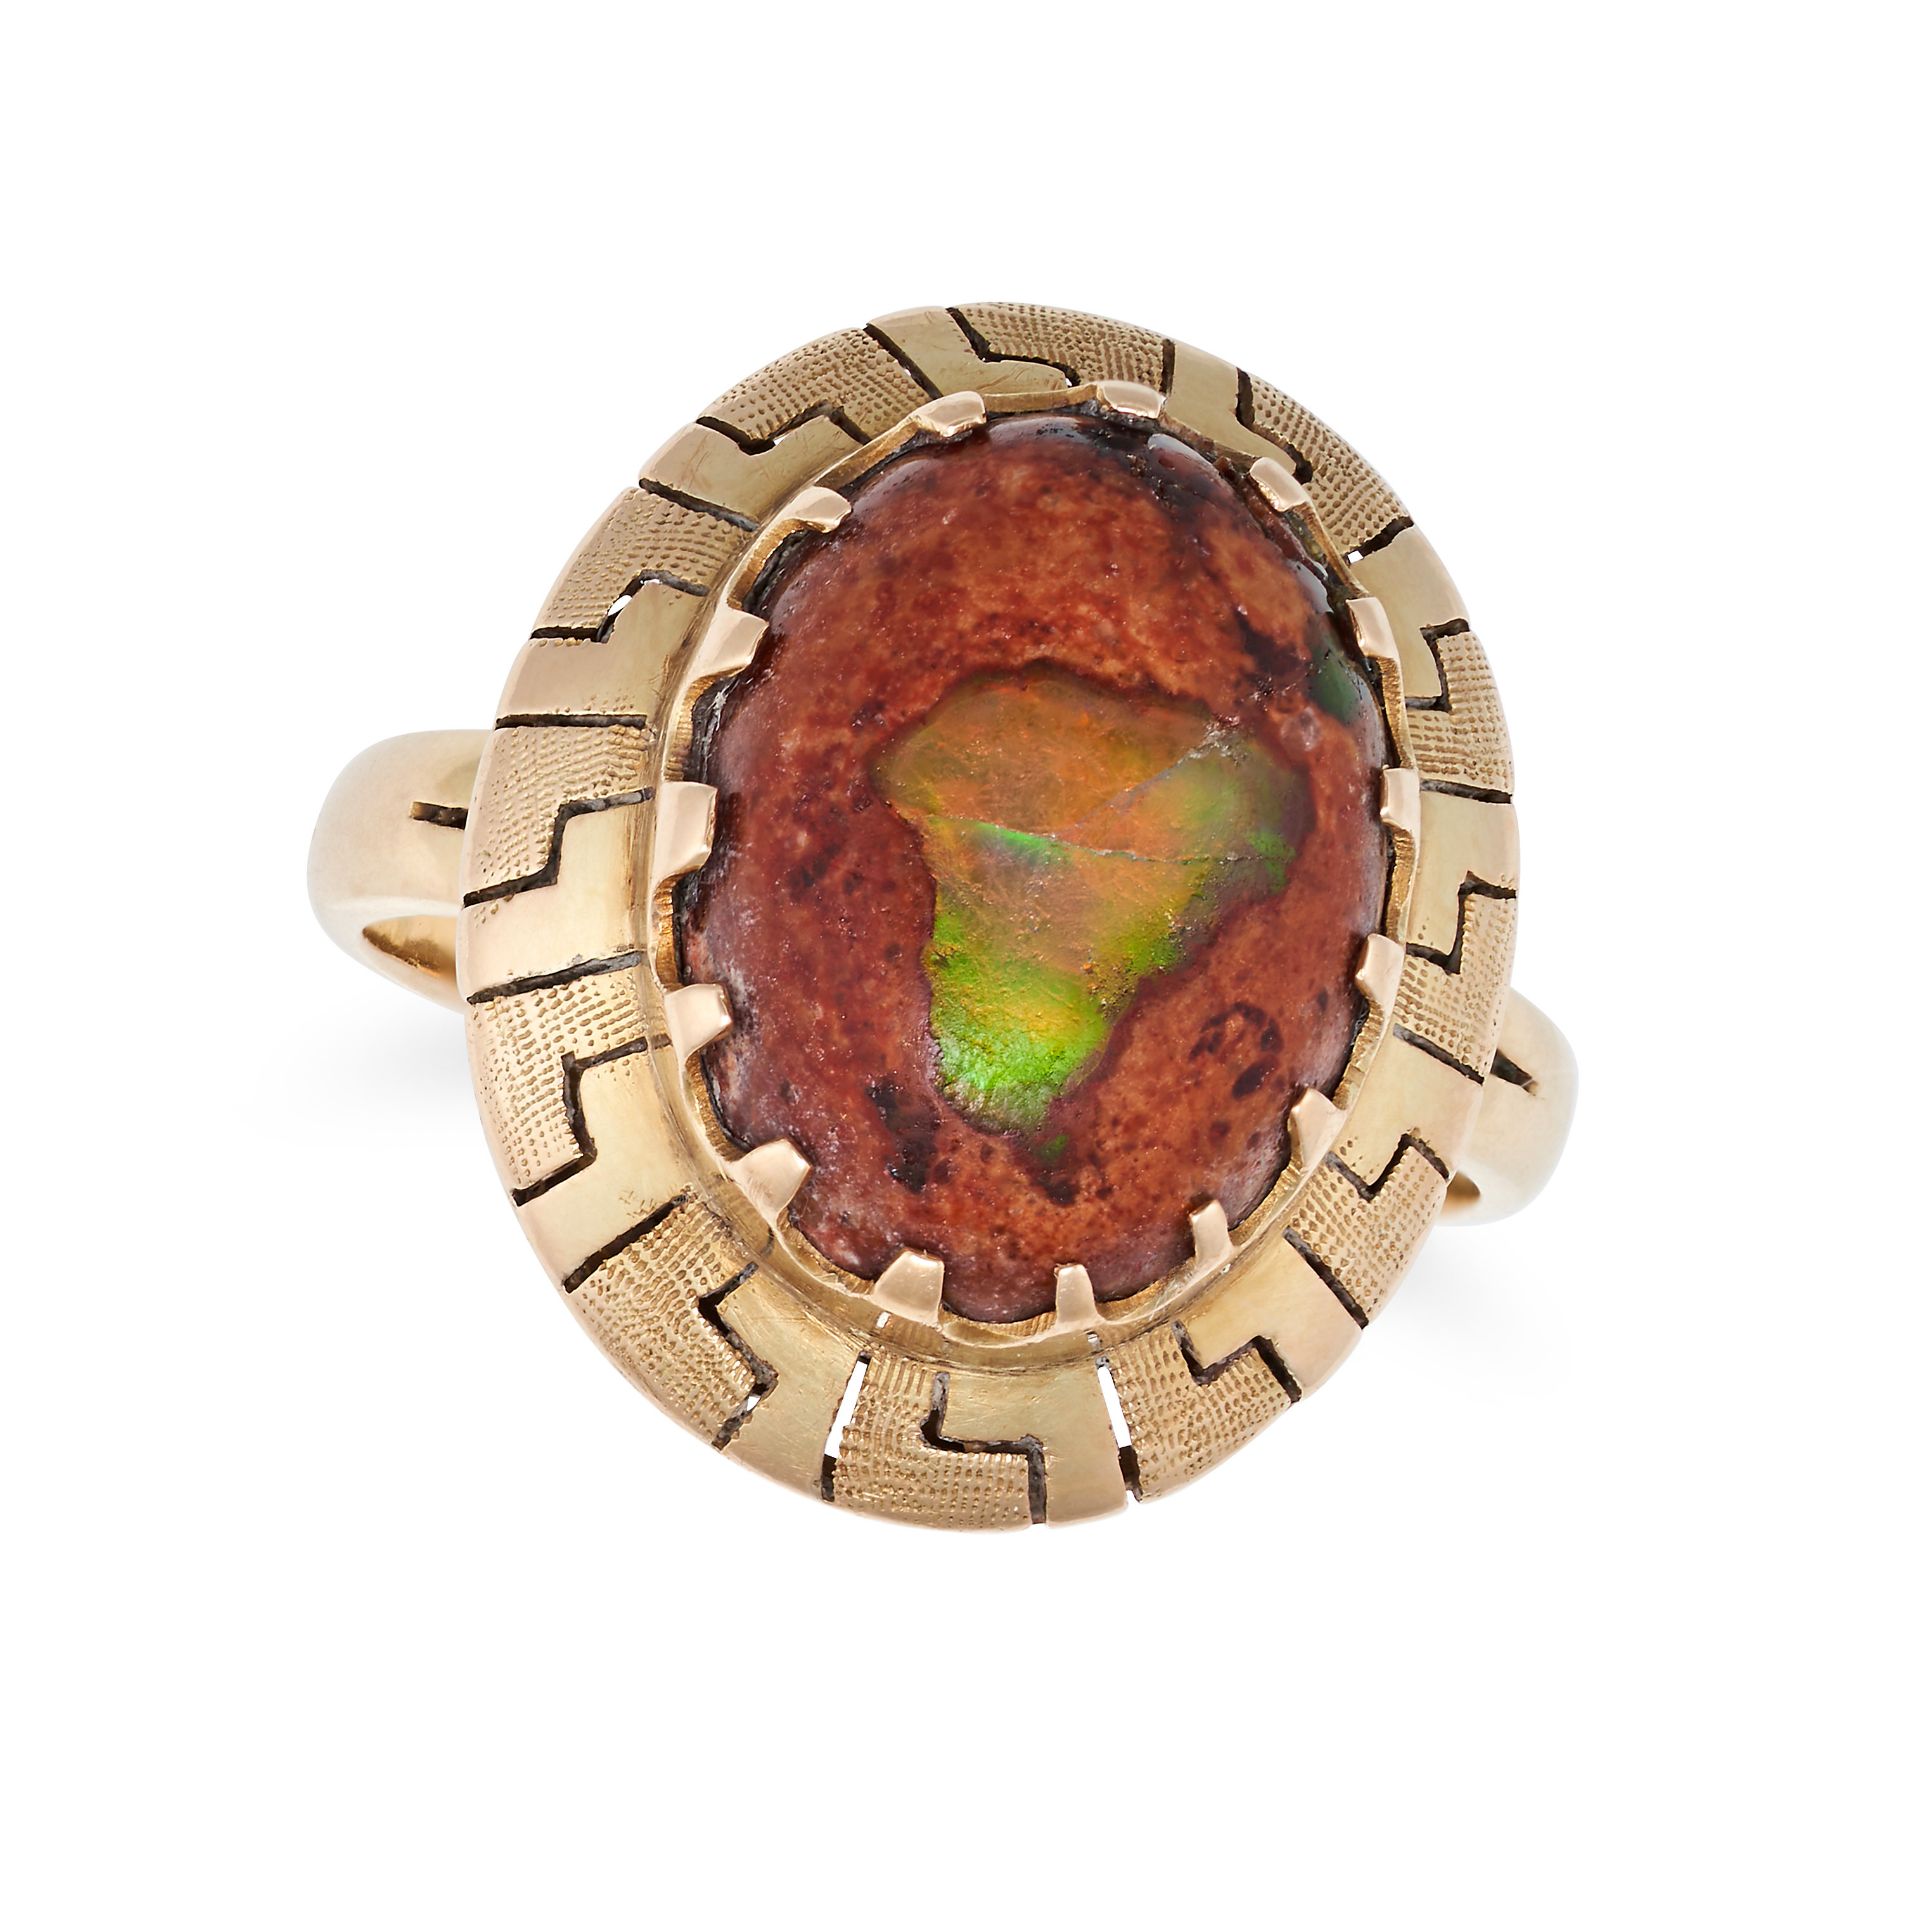 NO RESERVE - A BOULDER OPAL DRESS RING in 14ct yellow gold, set with a cabochon boulder opal in a...